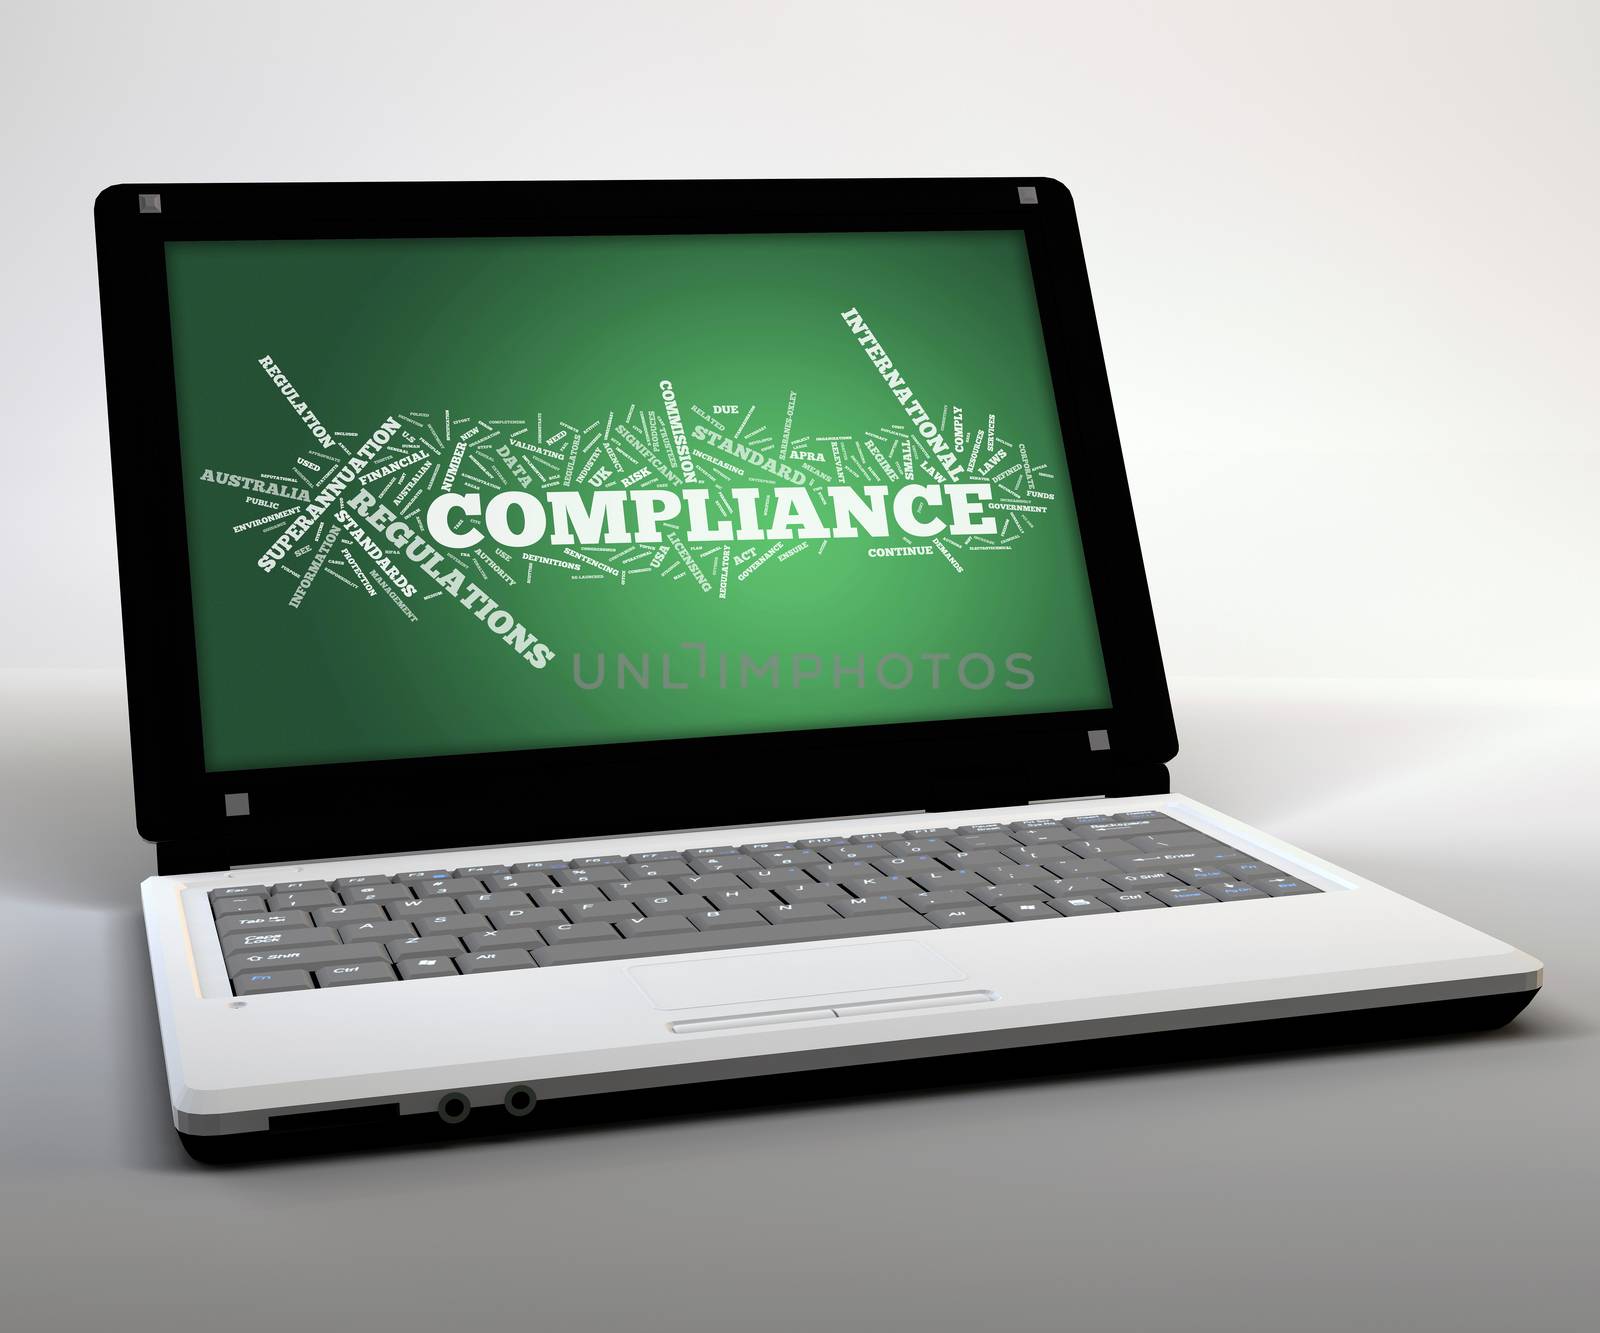 Mobile Thin Client / Netbook "Compliance" by mindscanner